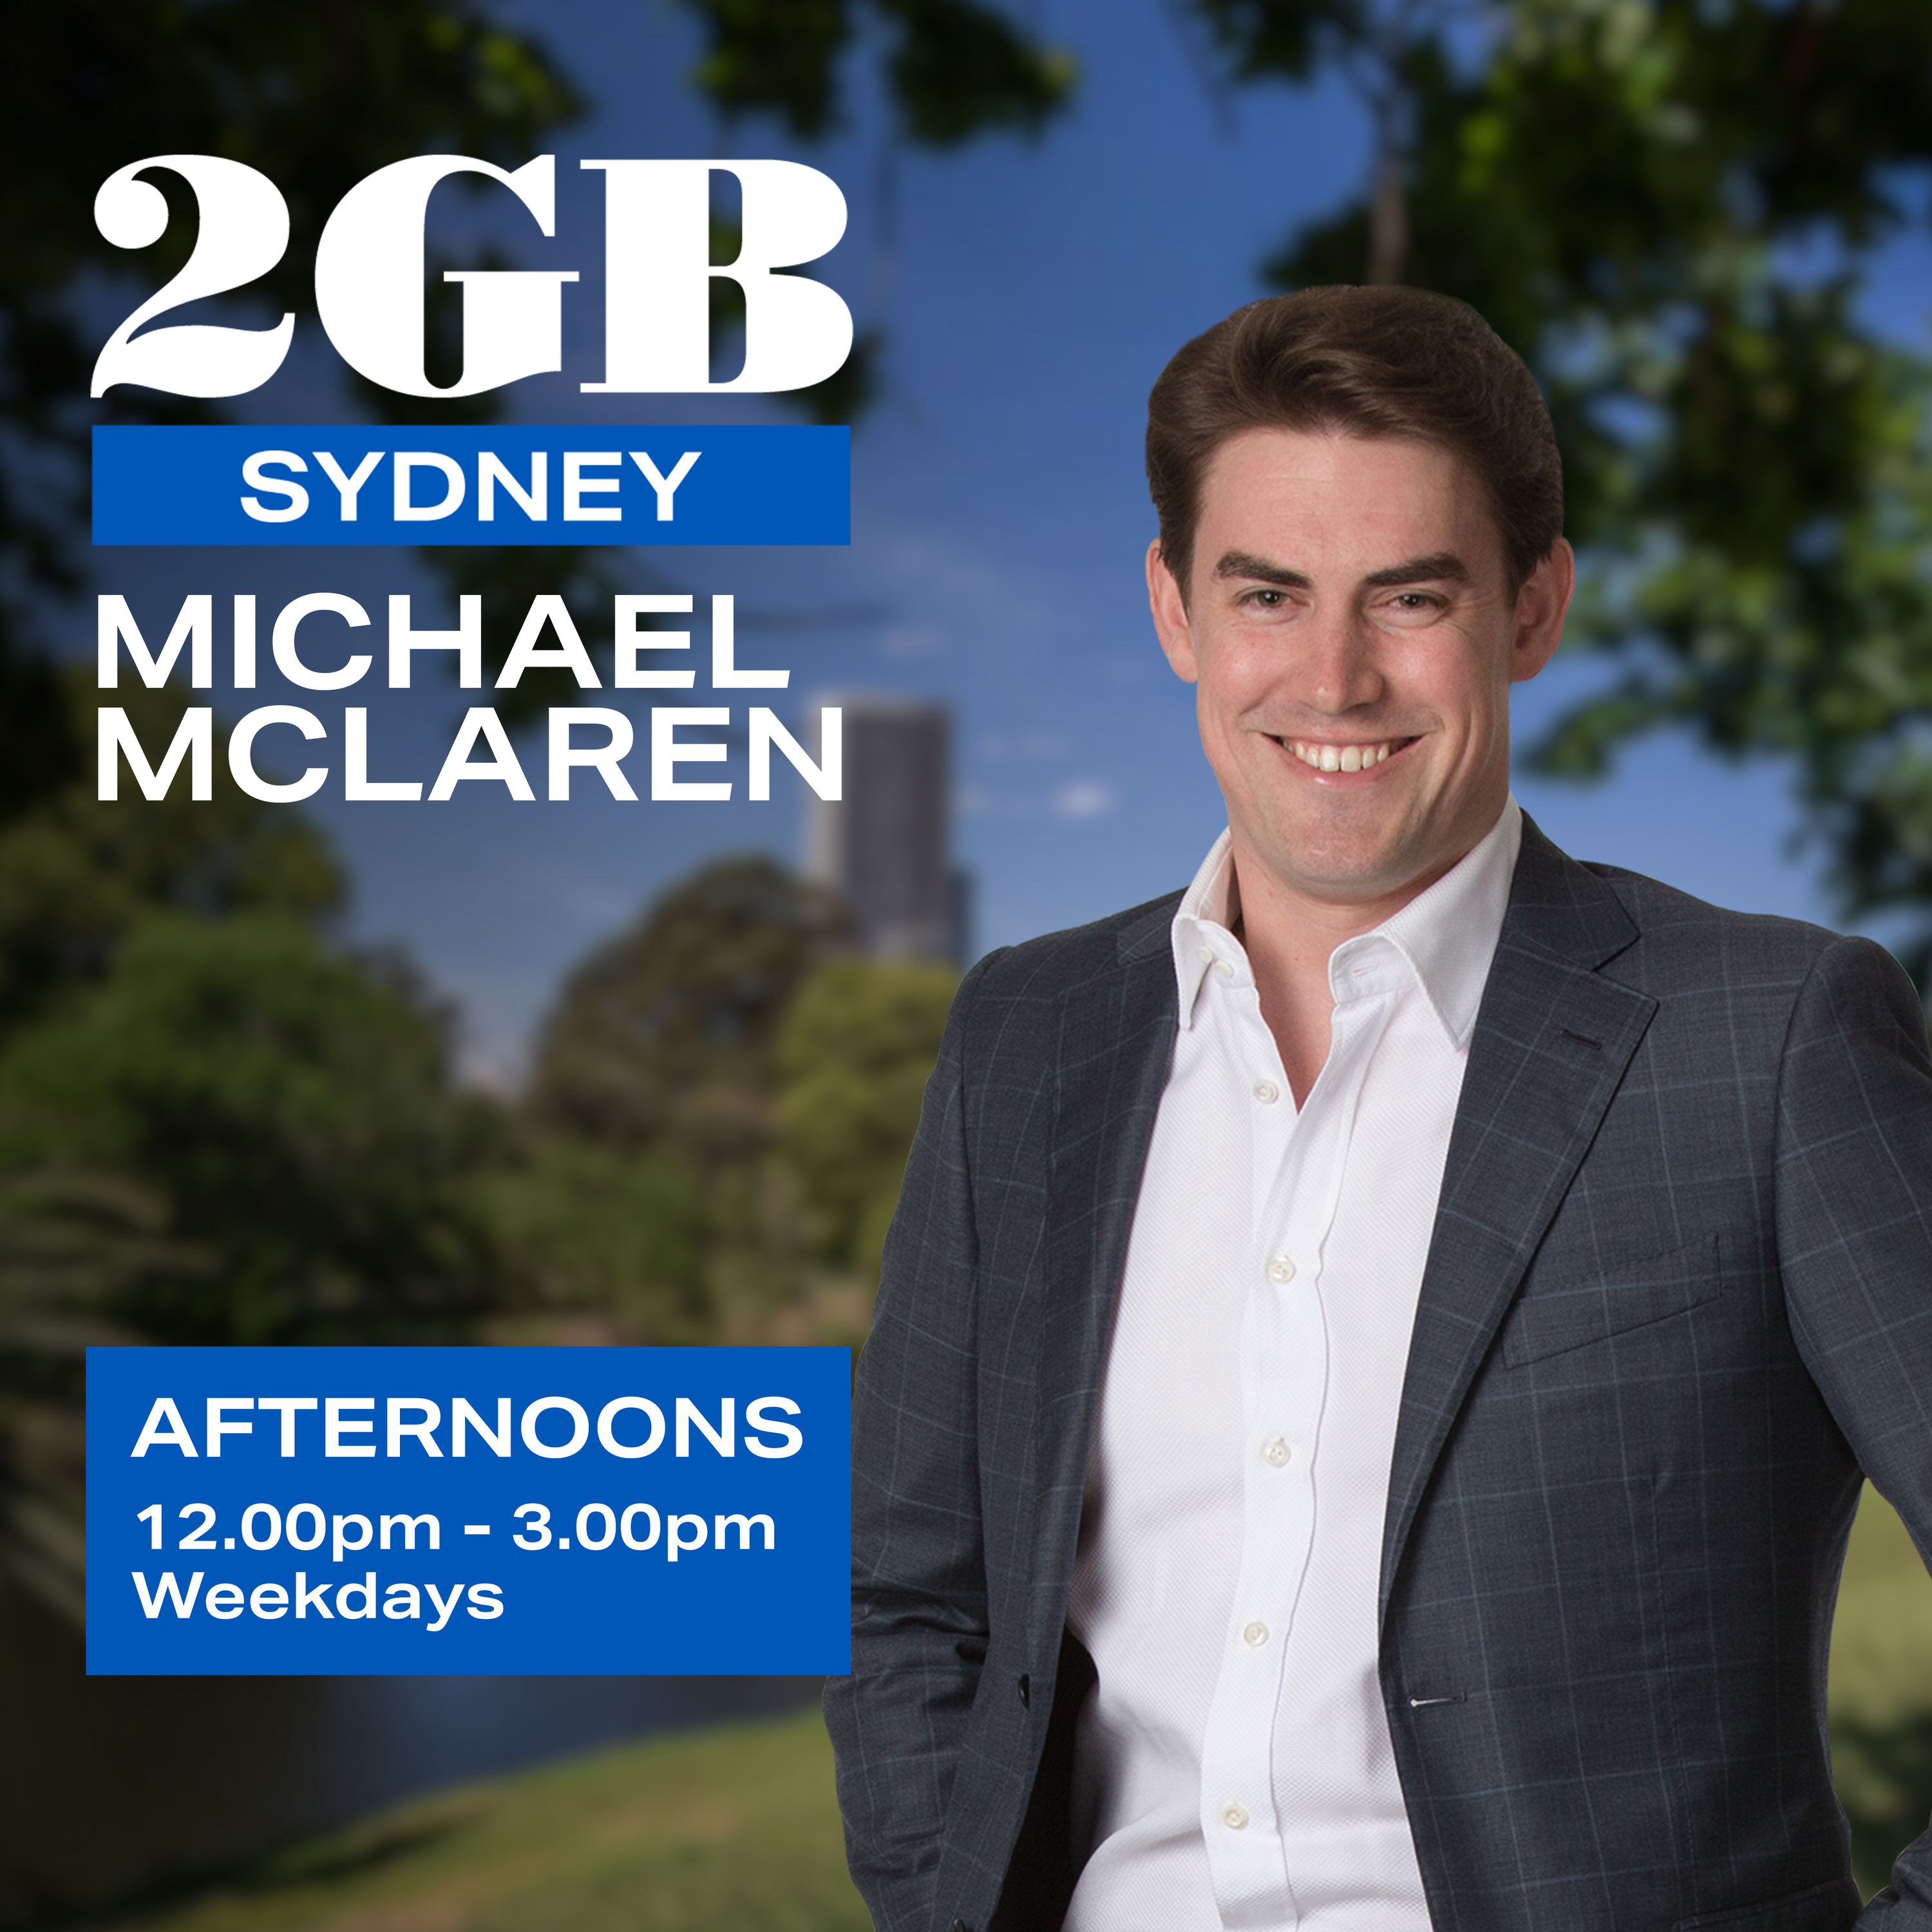 Afternoons with Michael McLaren - Tuesday, 27th February